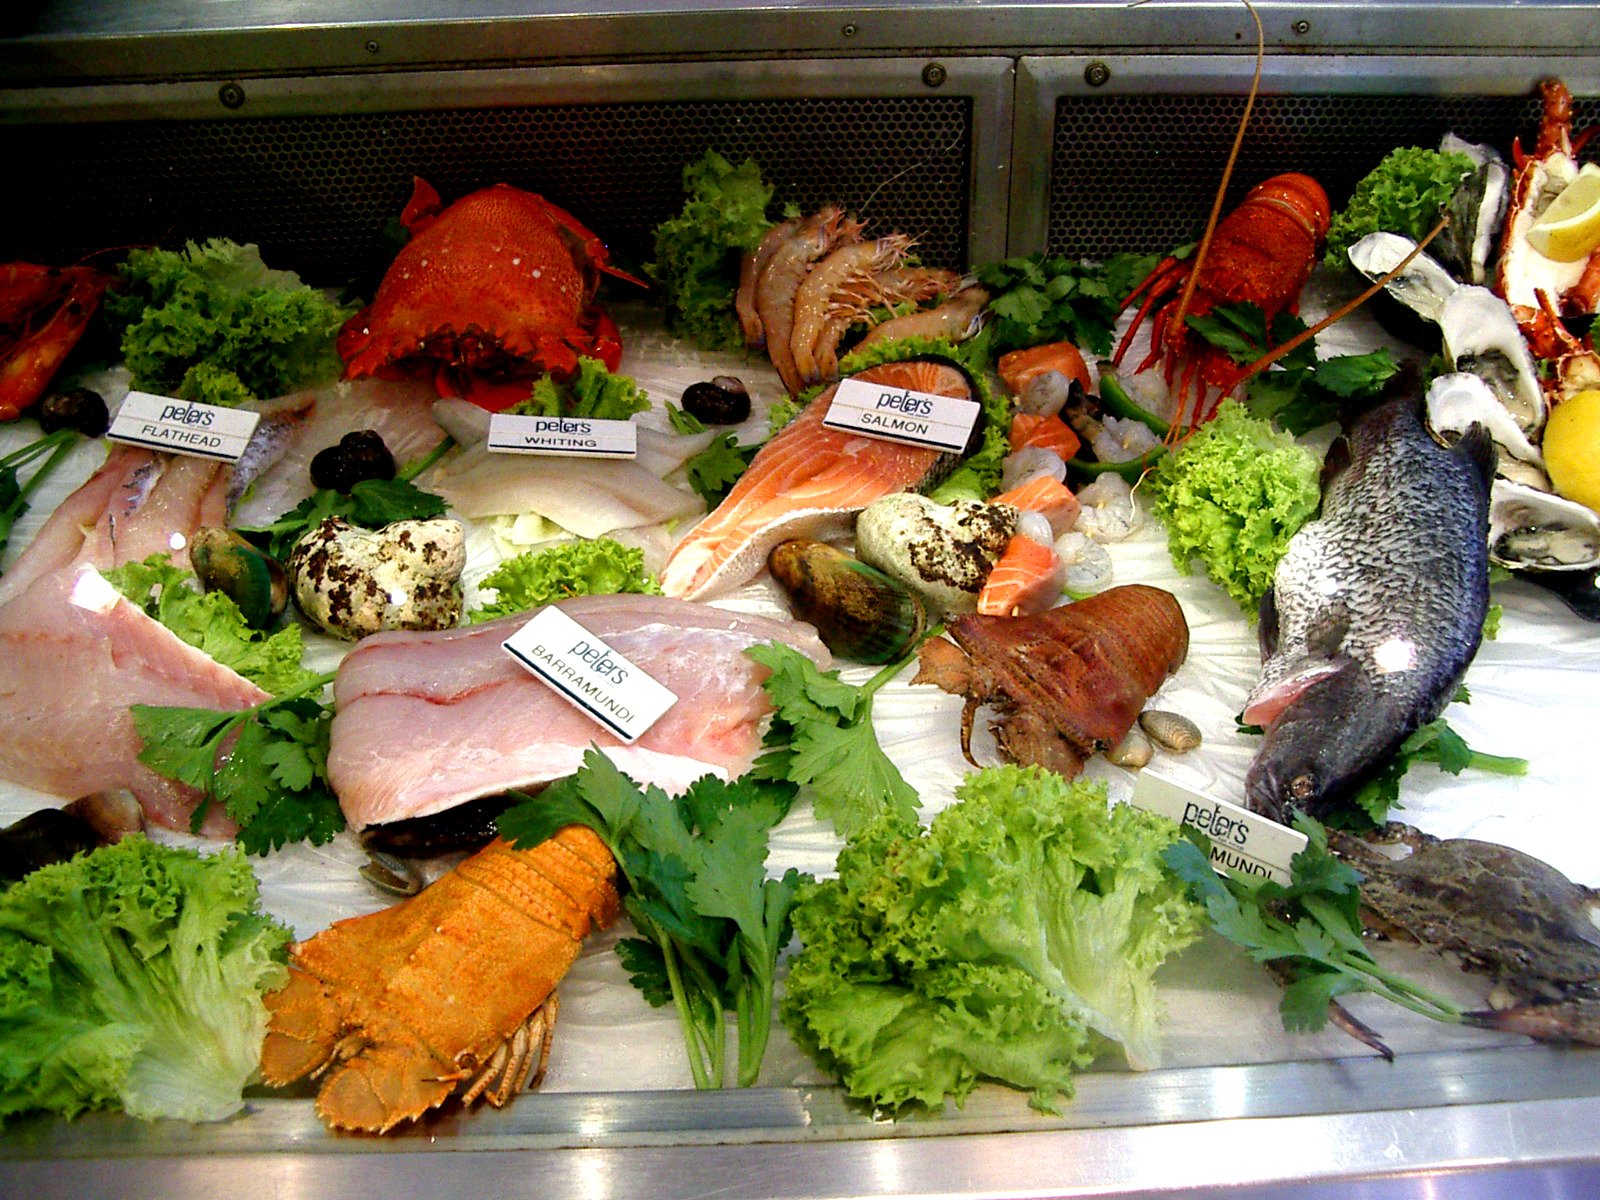 food is displayed on a plate near other vegetables and fish